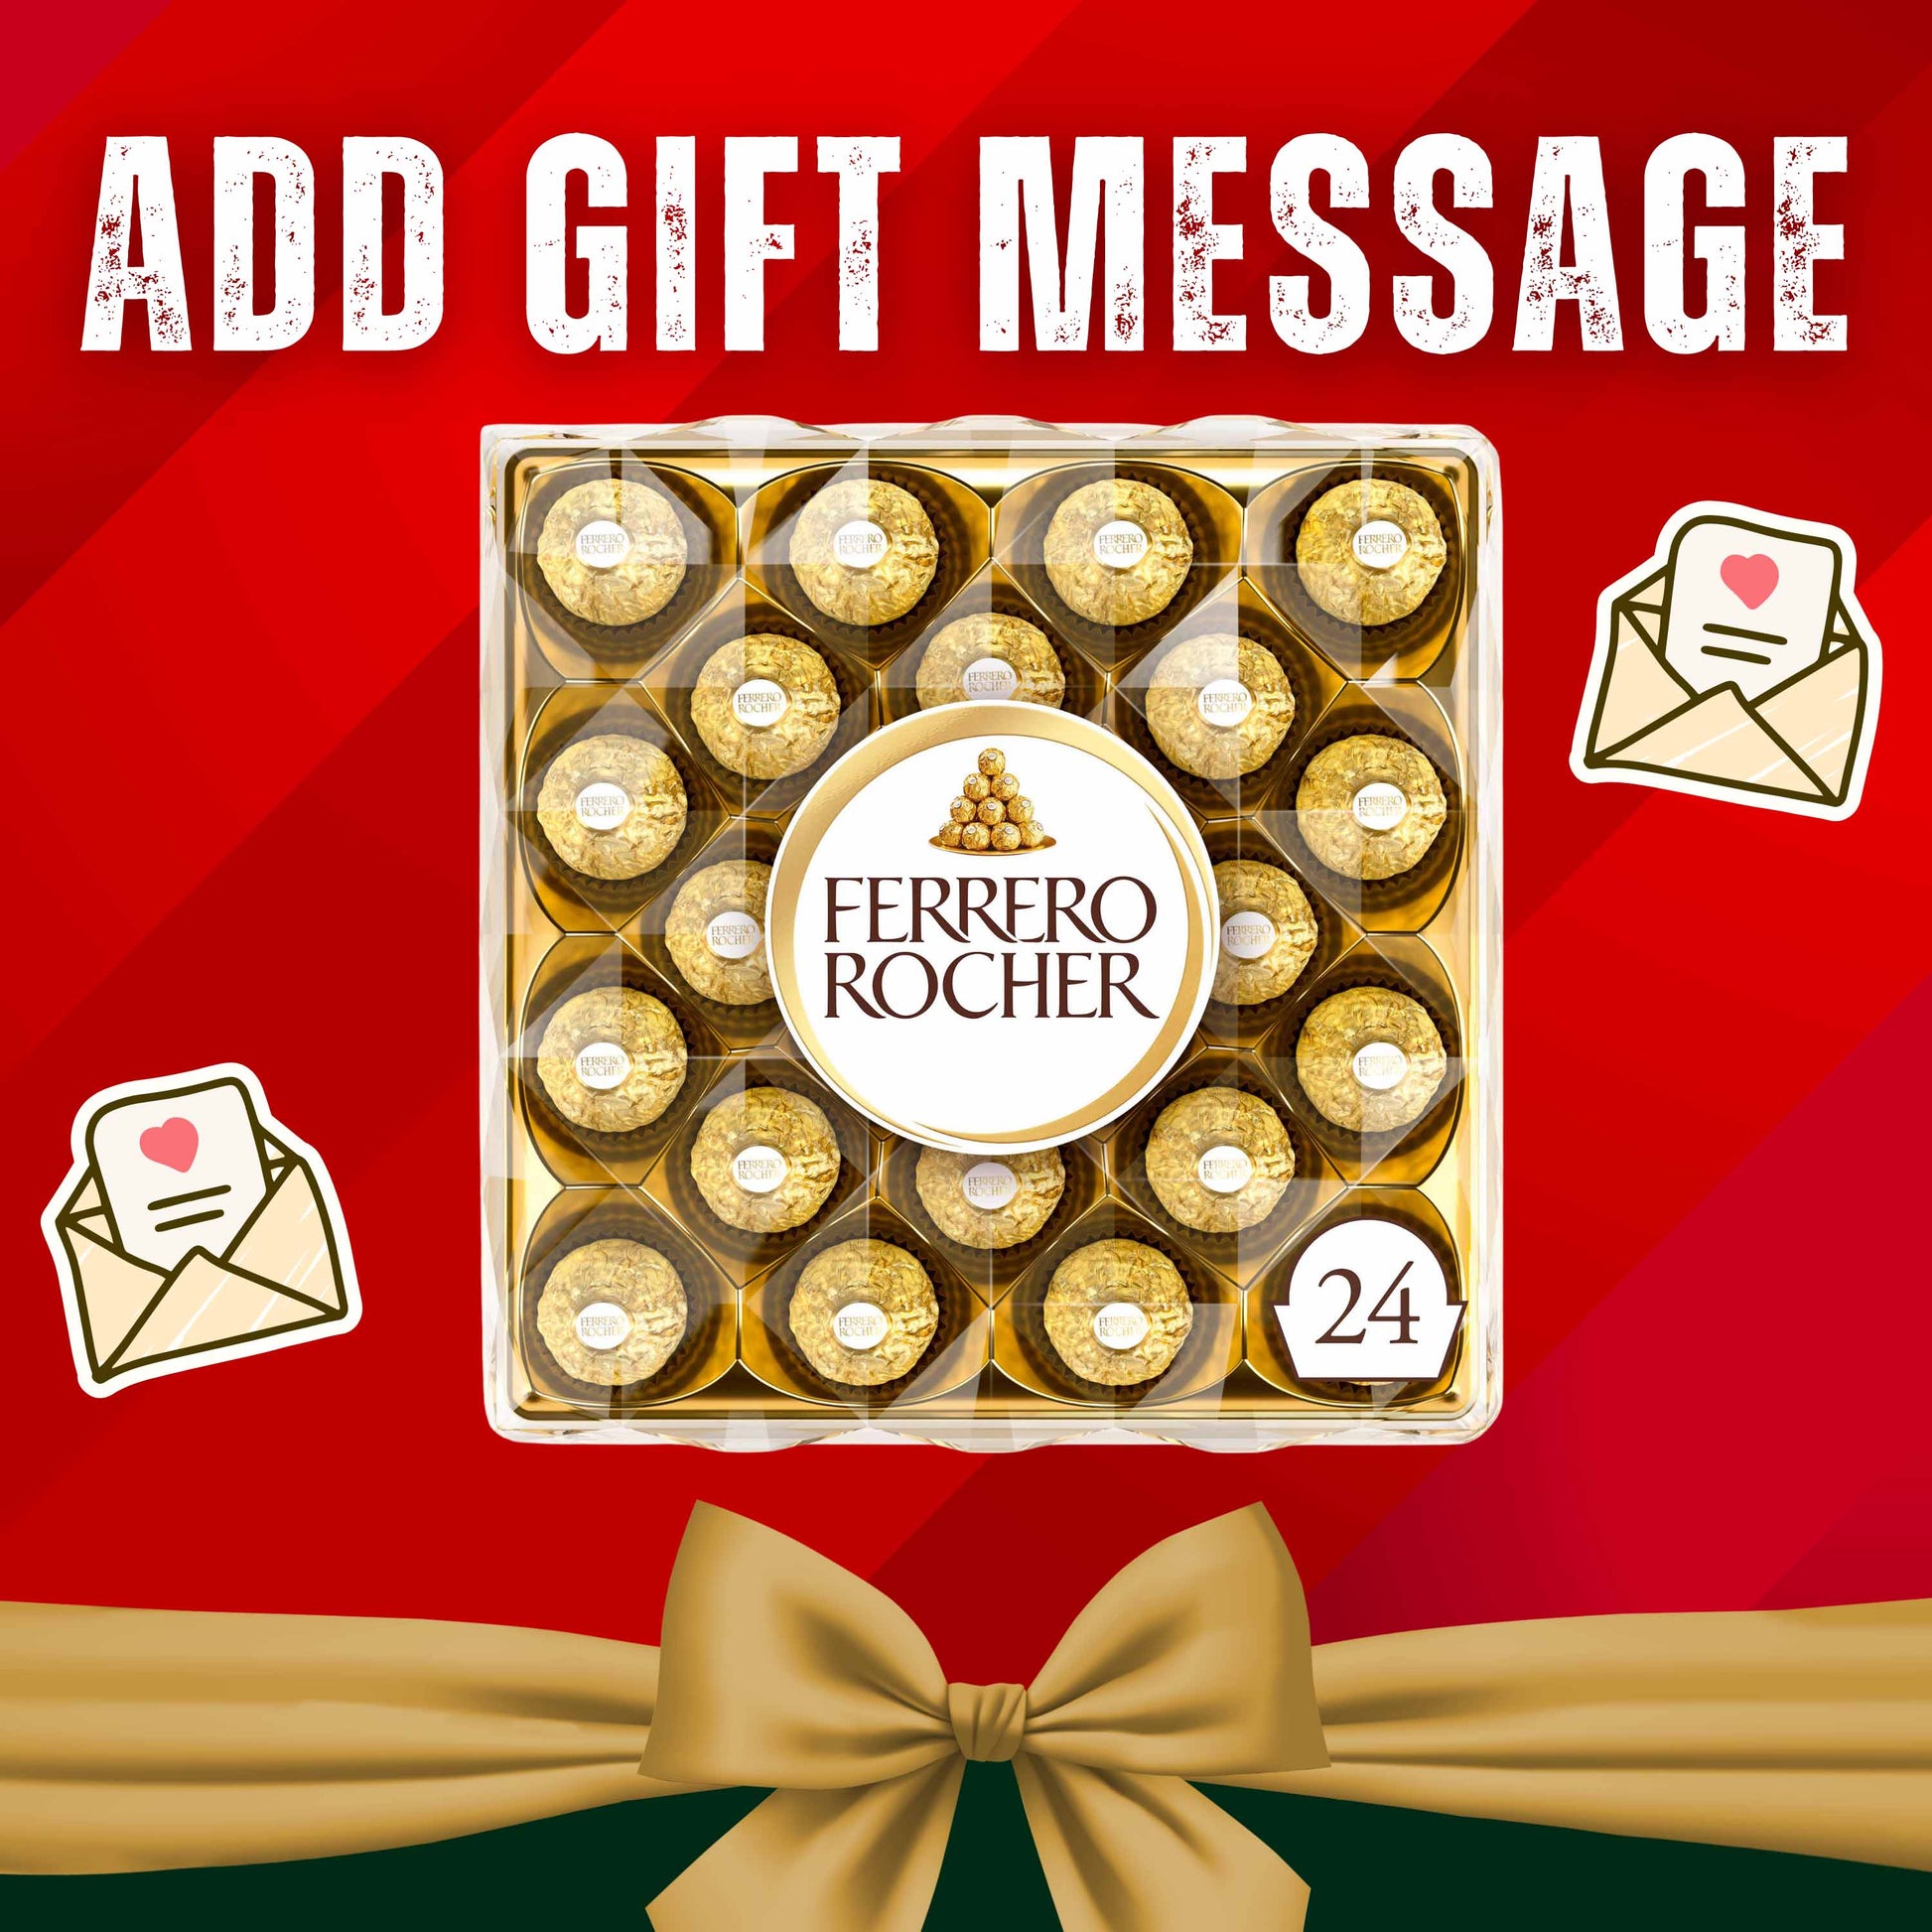 Ferrero Rocher Chocolate Pralines Gift Box 24 Pieces - 300g - Gift Message Boxes